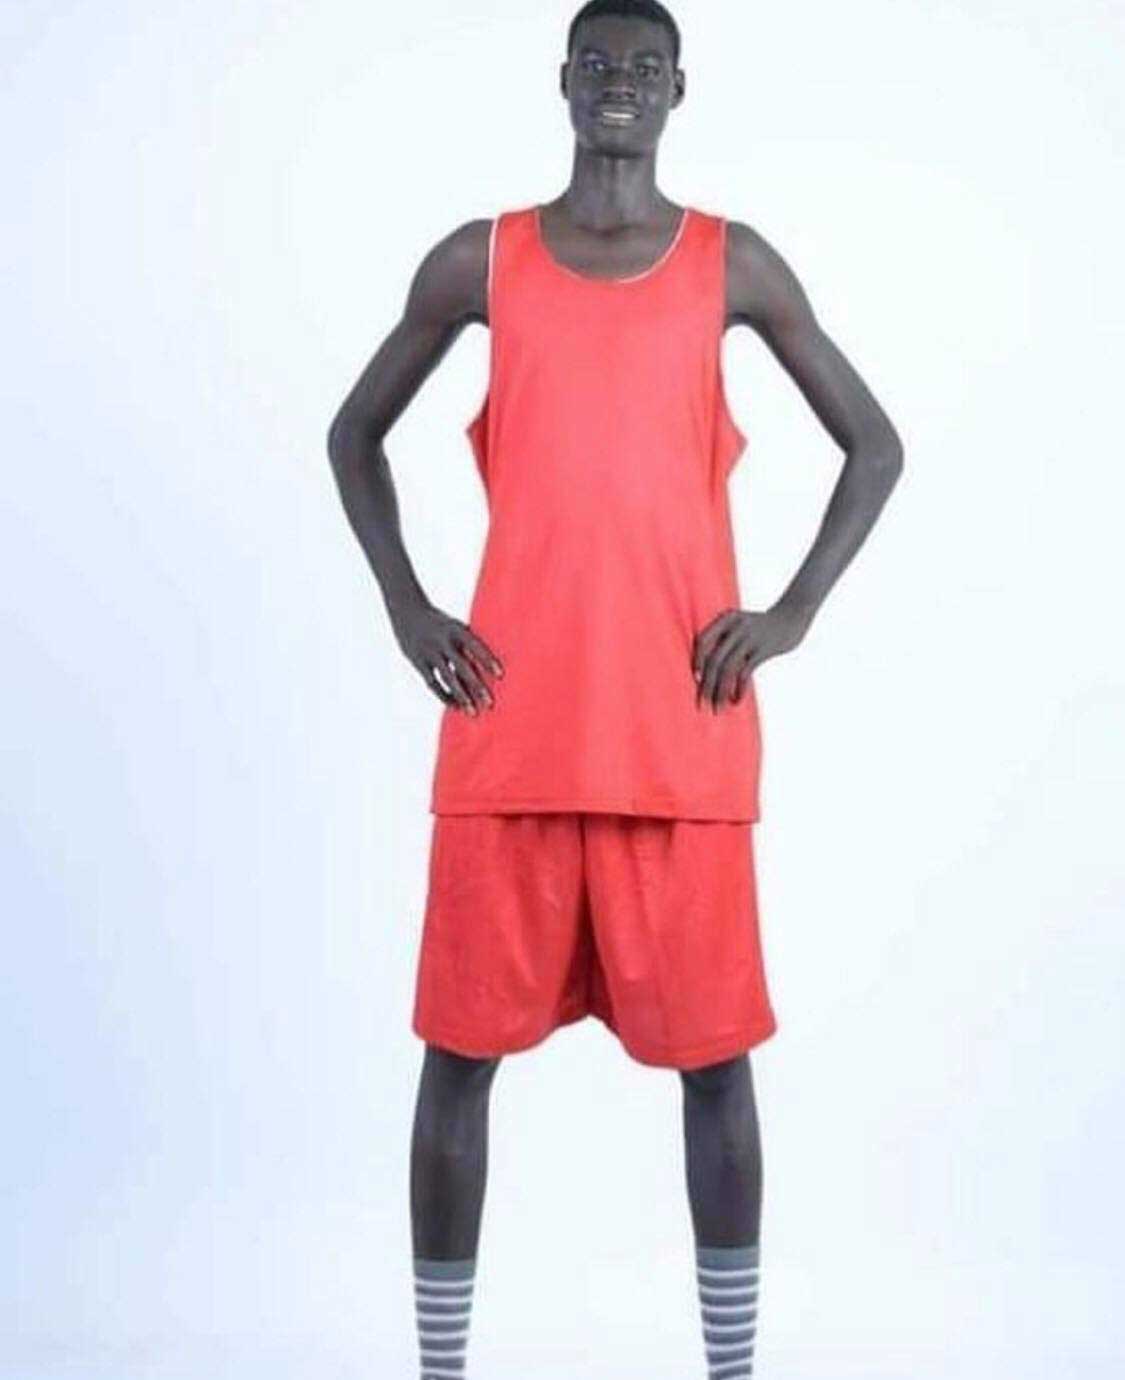 The 14 year old tallest man in Ghana